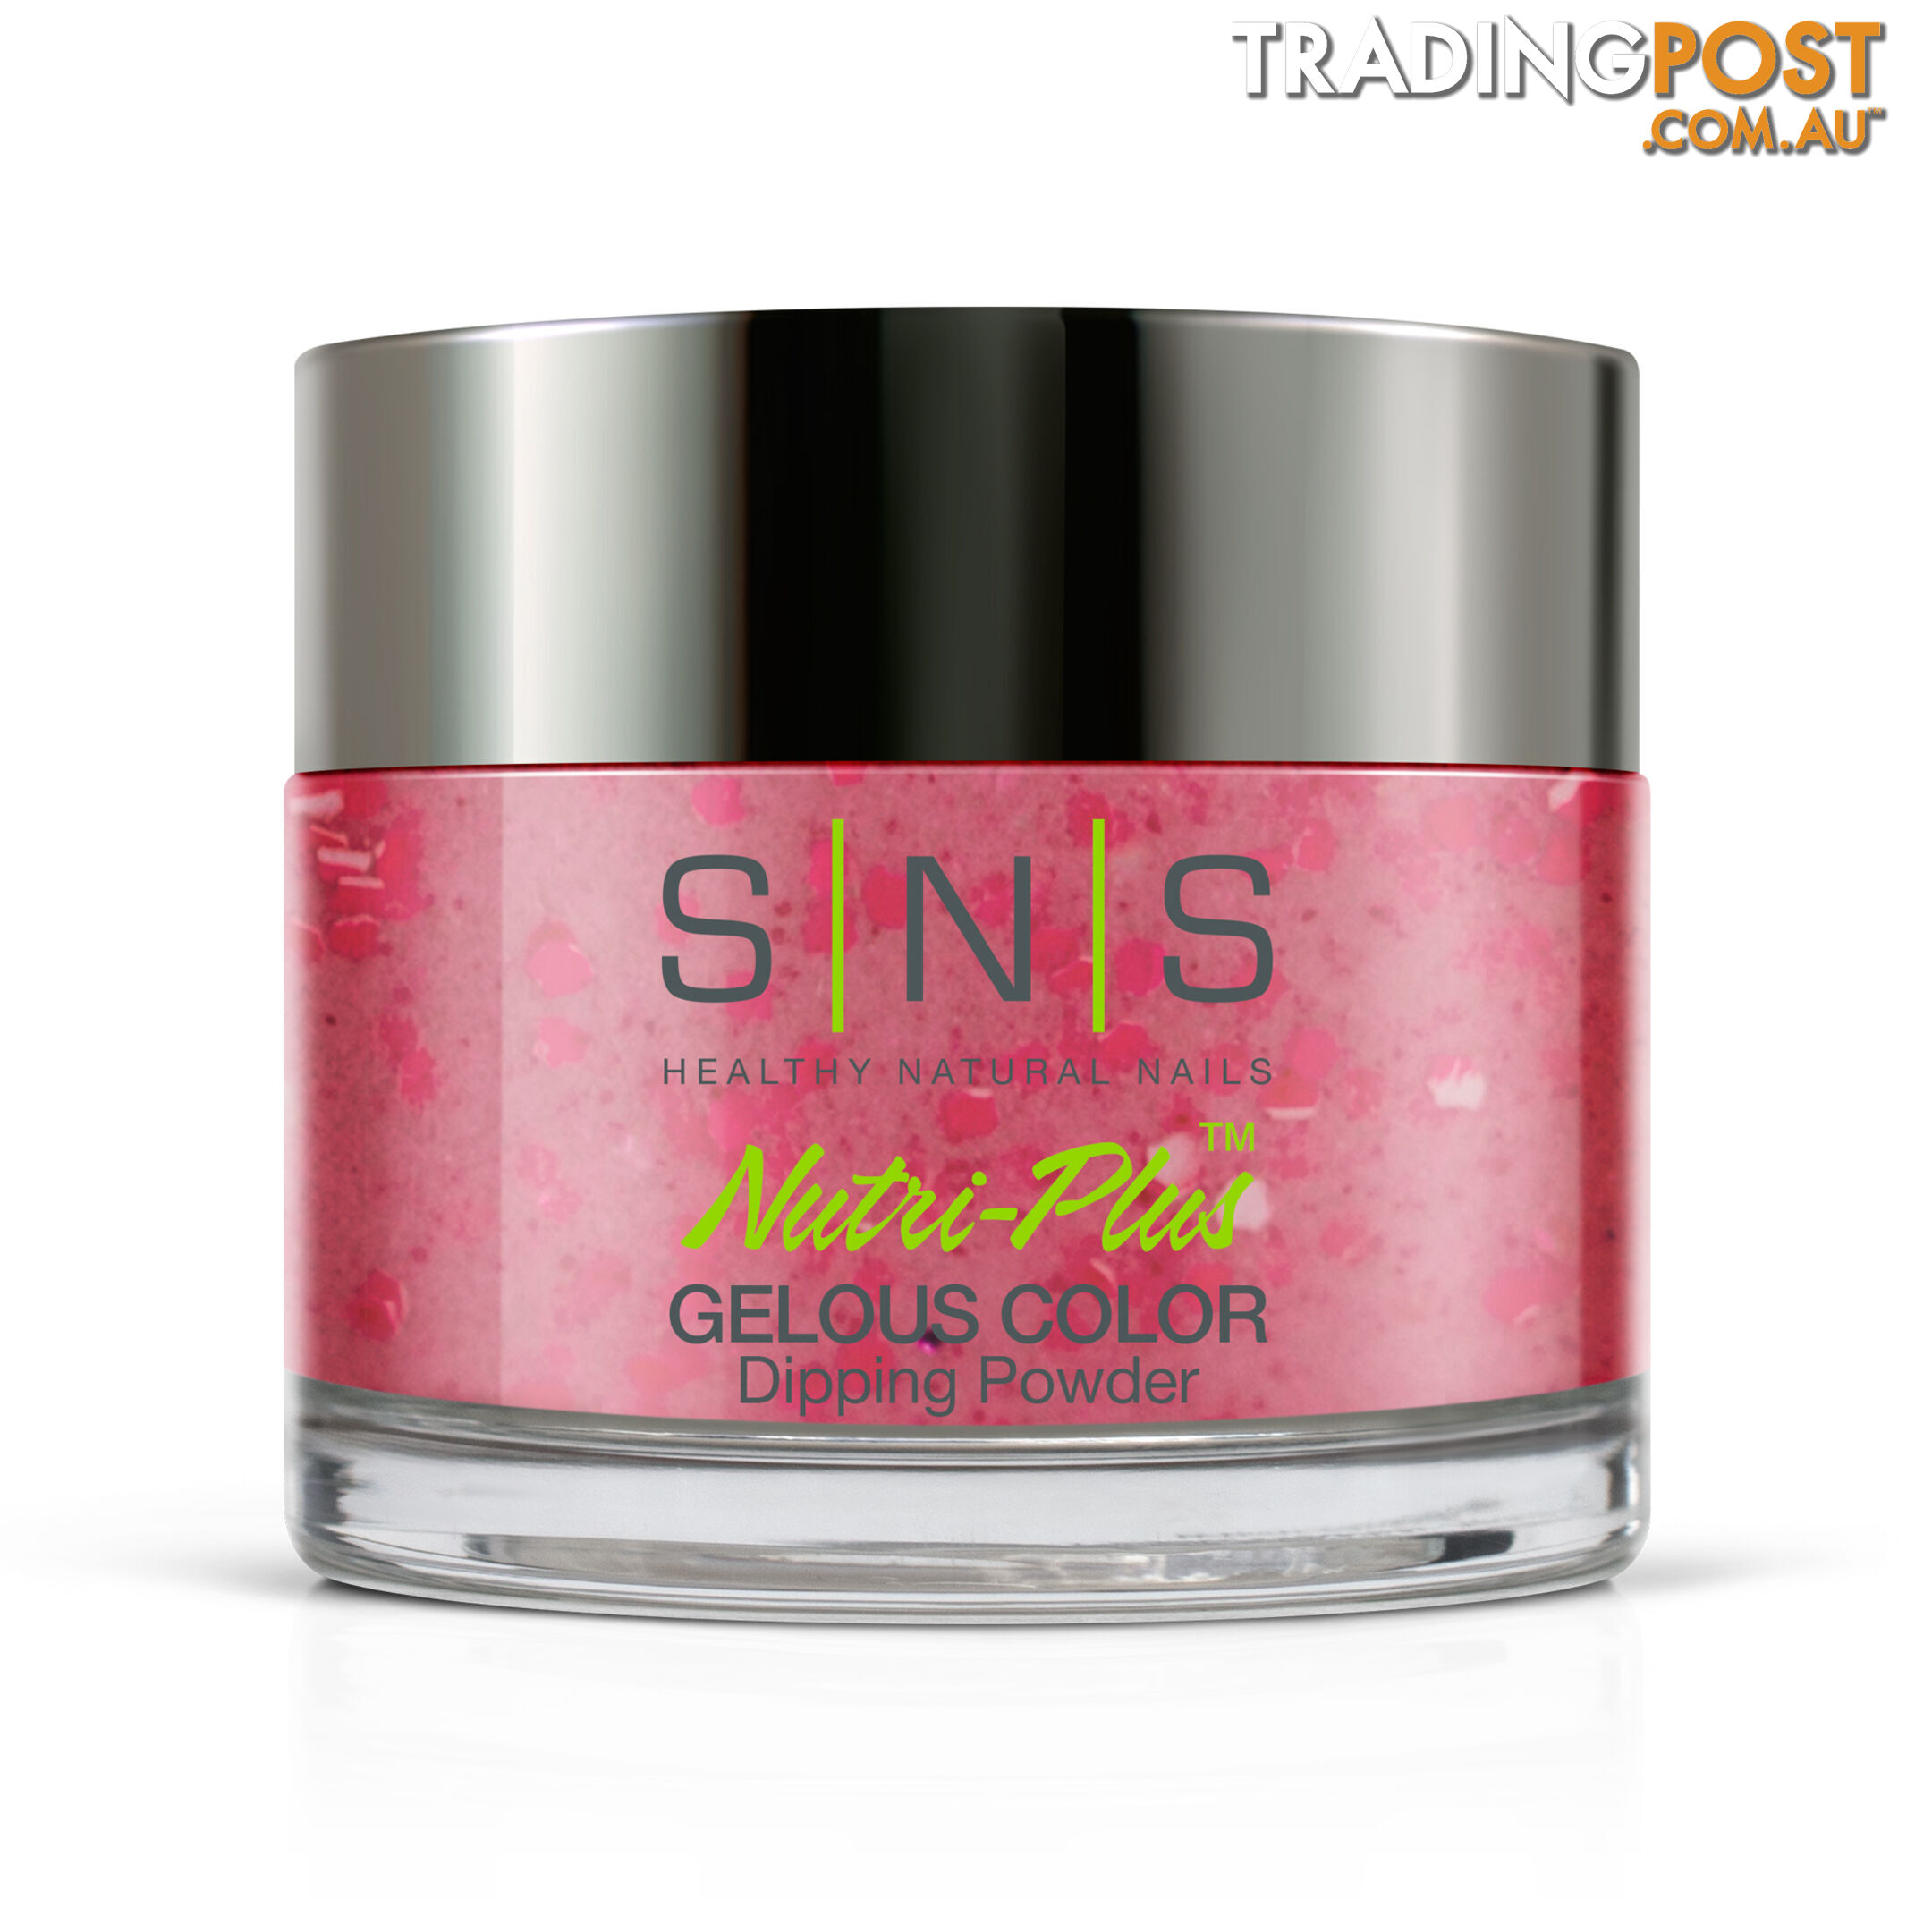 SNS DS05 Gelous Dipping Powder 28g (1oz) Much To My Shagrin - 635635723477